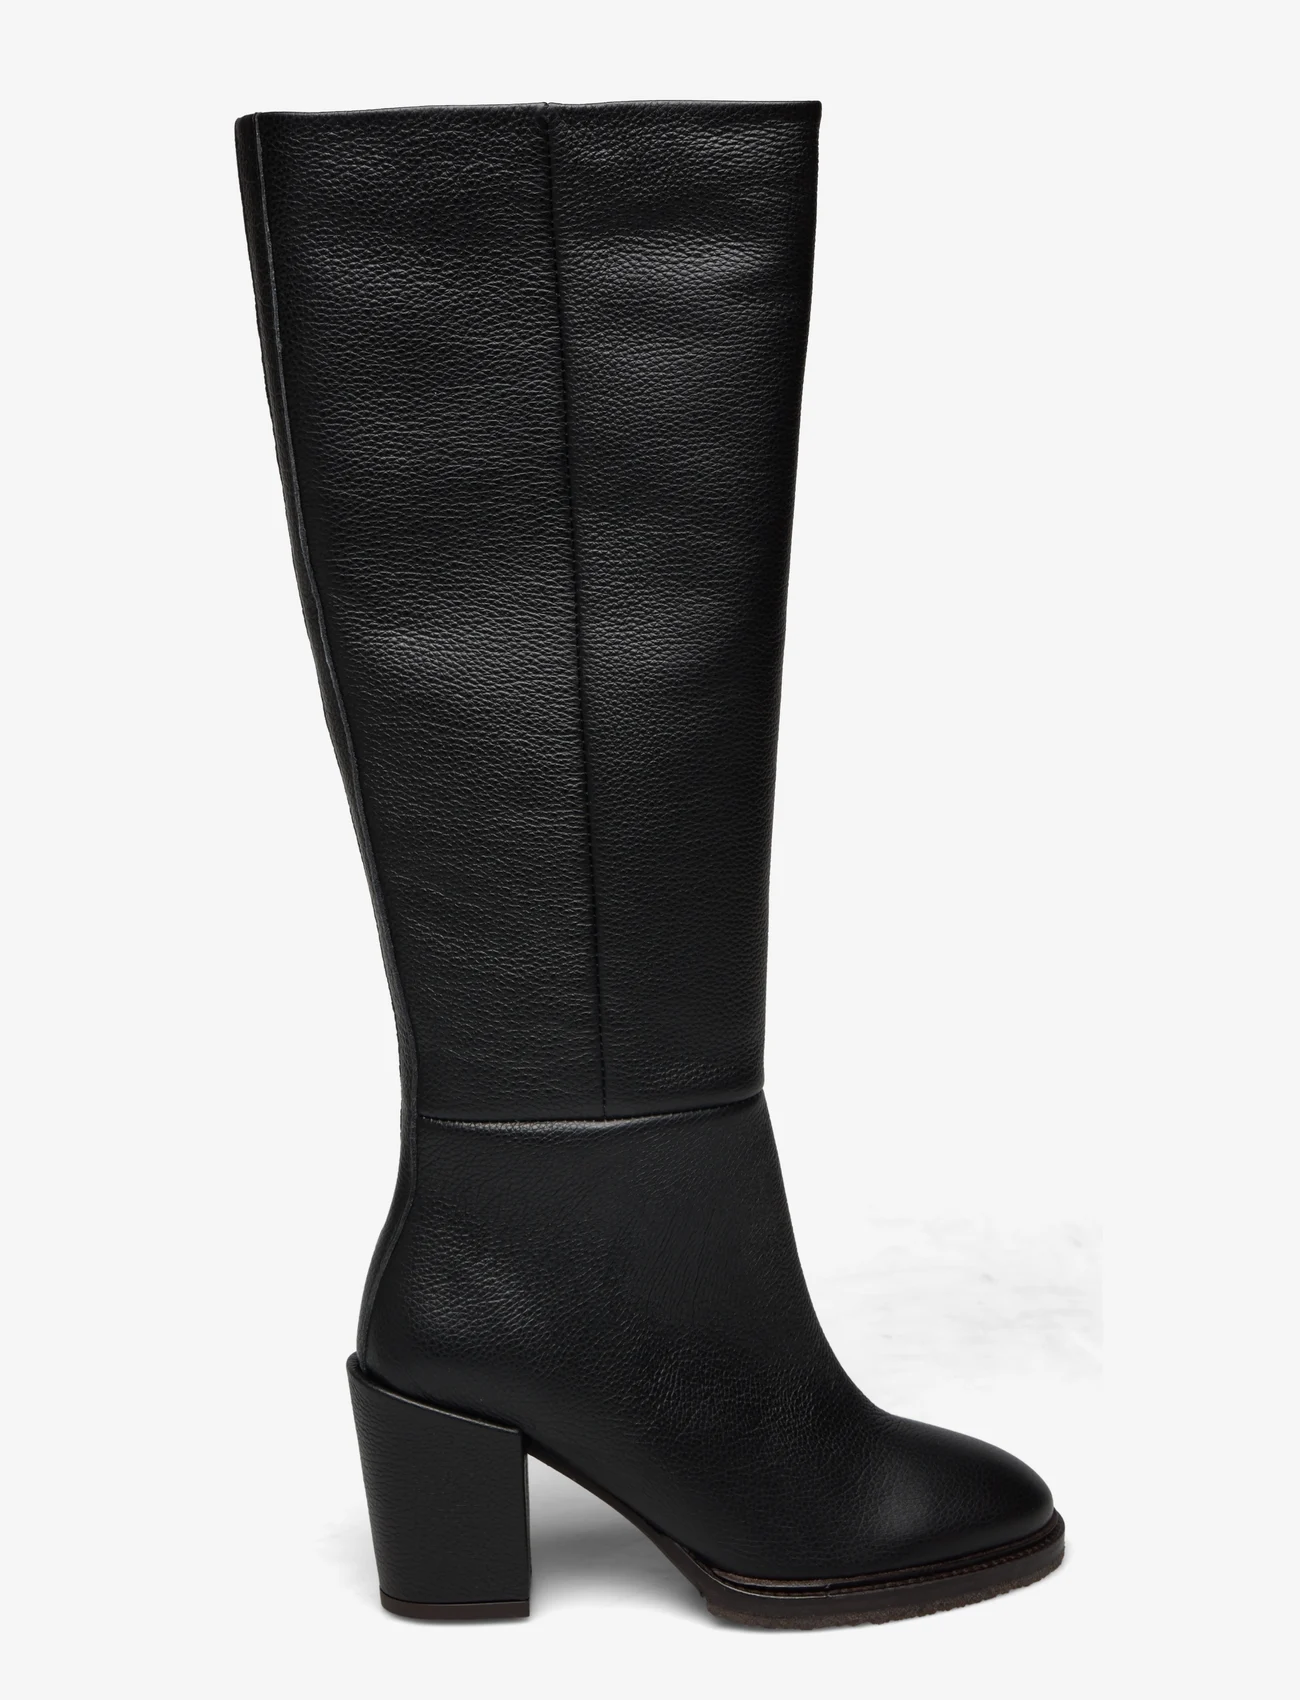 Dante6 - D6Willow knee boots - kniehohe stiefel - raven - 1